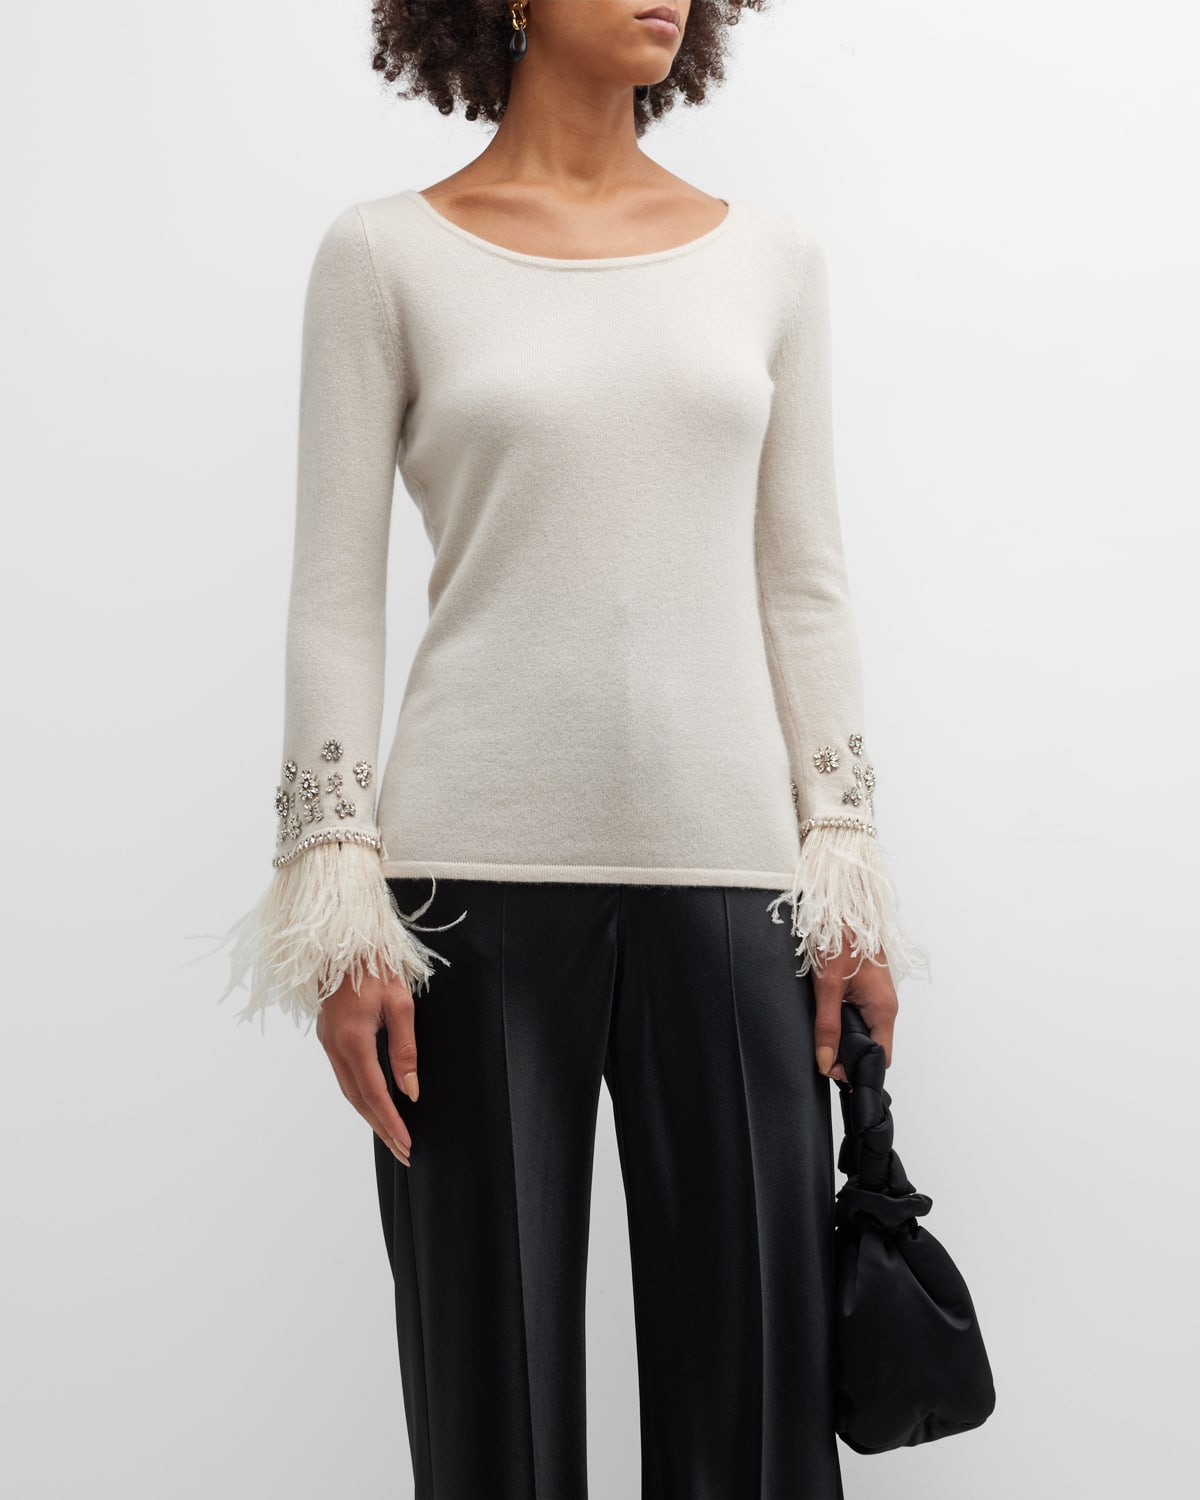 Neiman Marcus Cashmere Embellished Sweater W/ Feather Trim In Bone